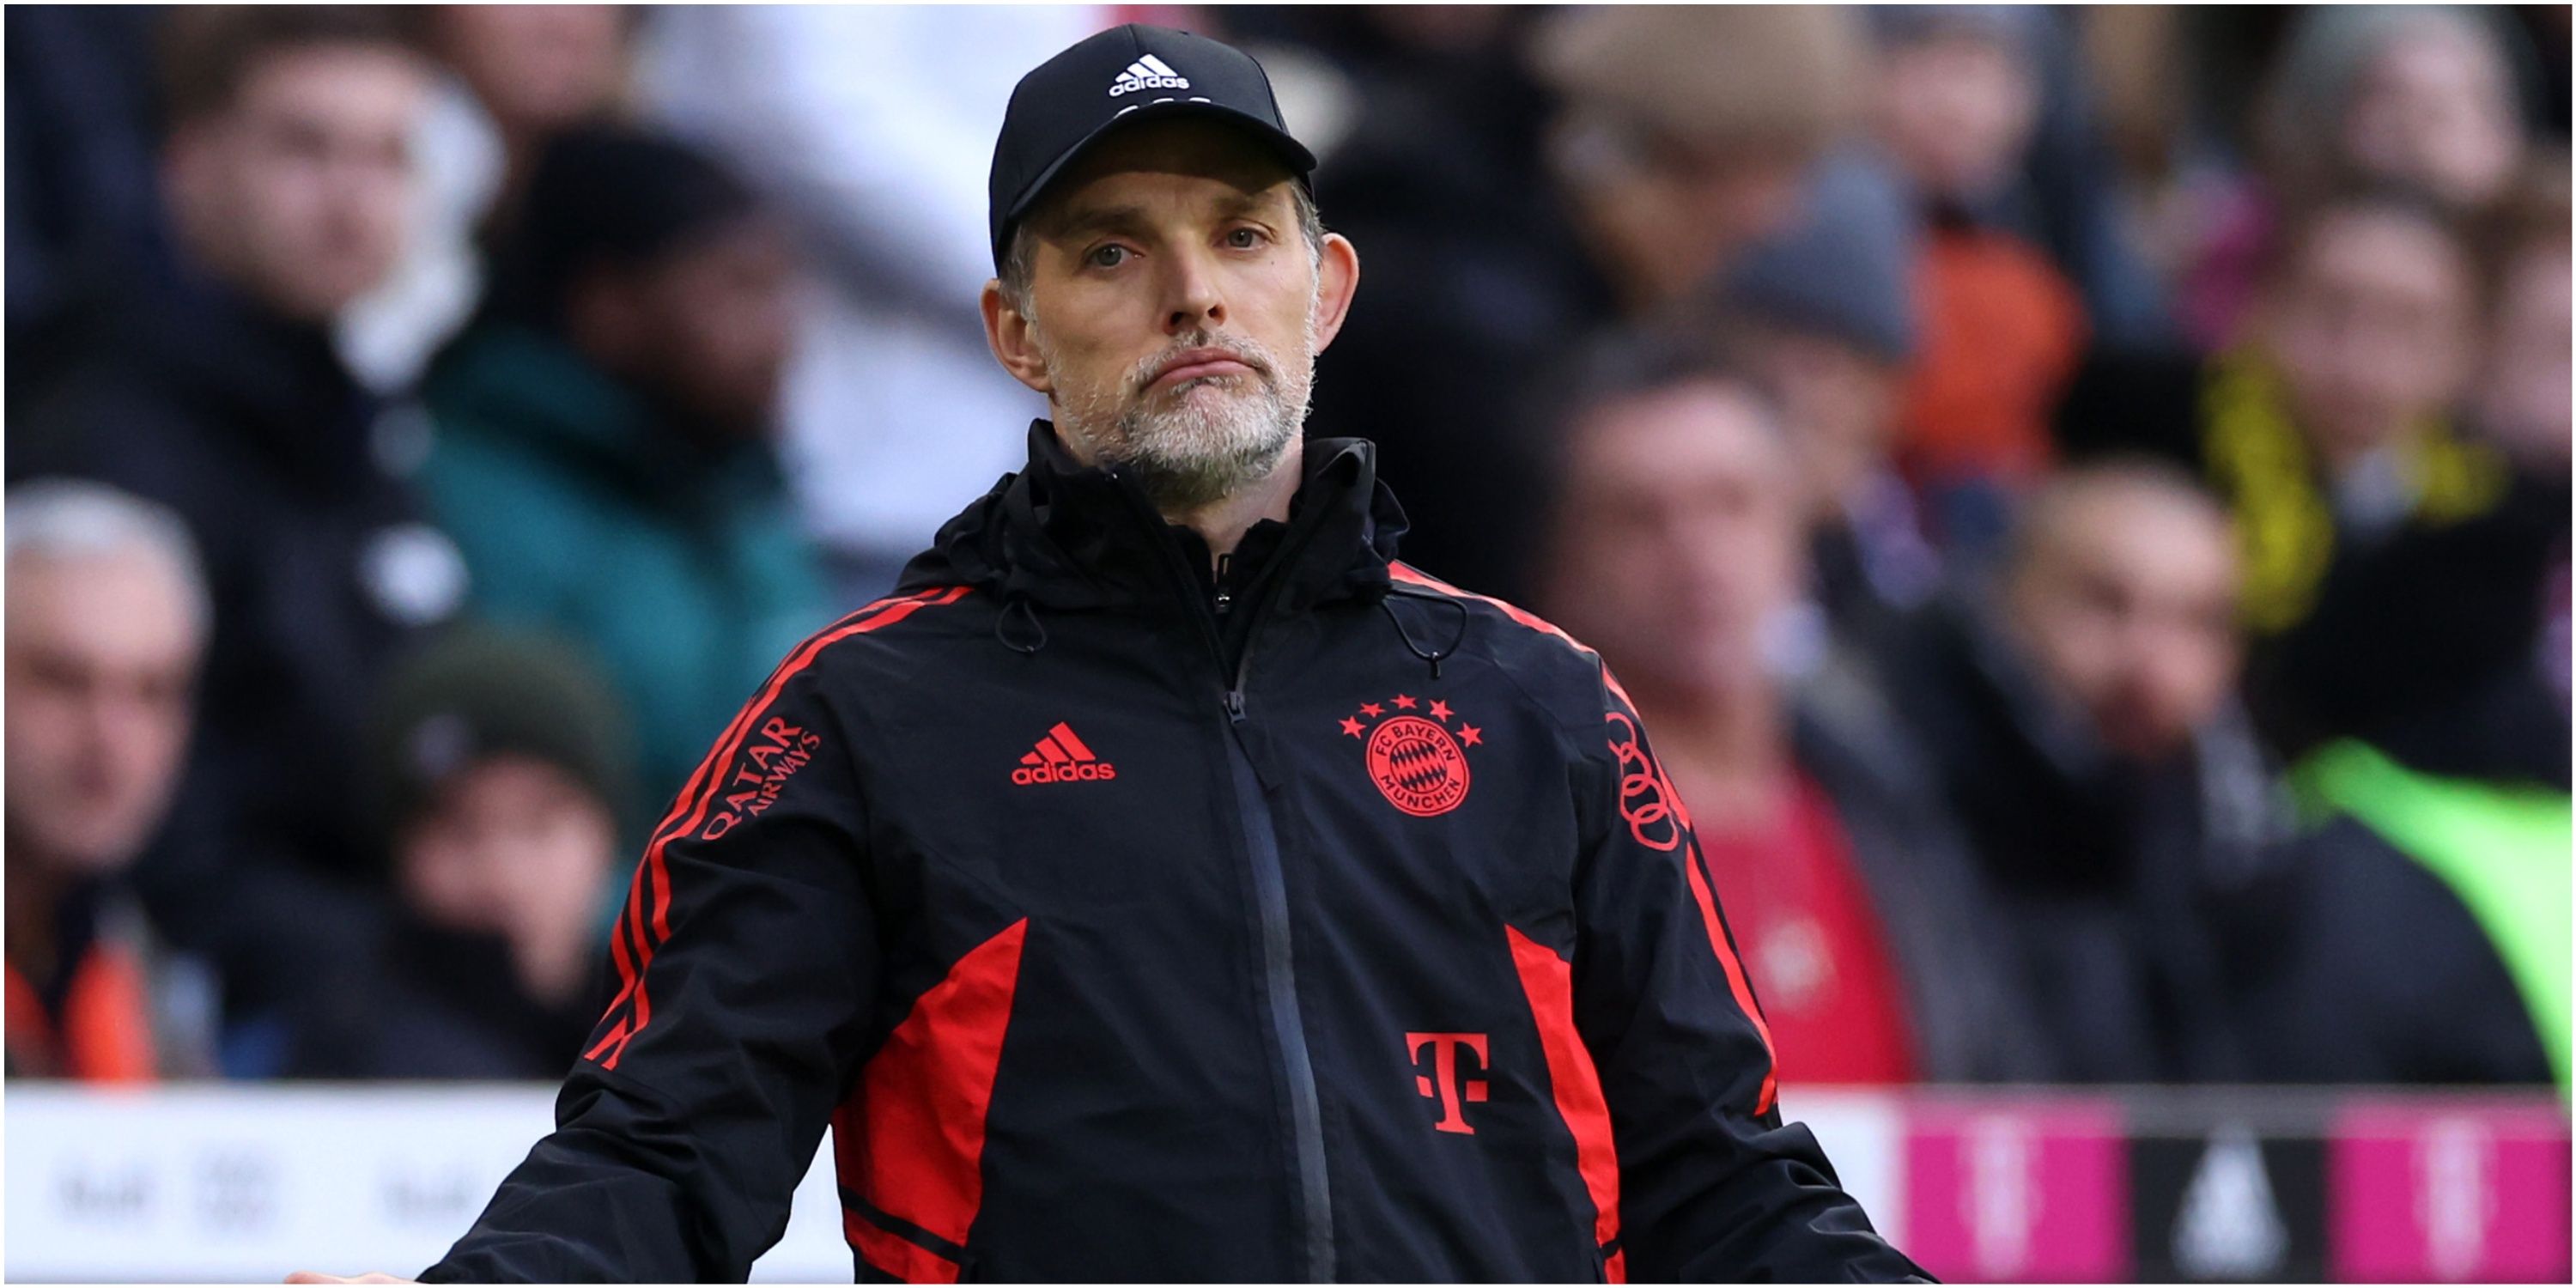  Image shows Bayern Munich's coach Thomas Tuchel making a substitution during a match against Real Madrid.